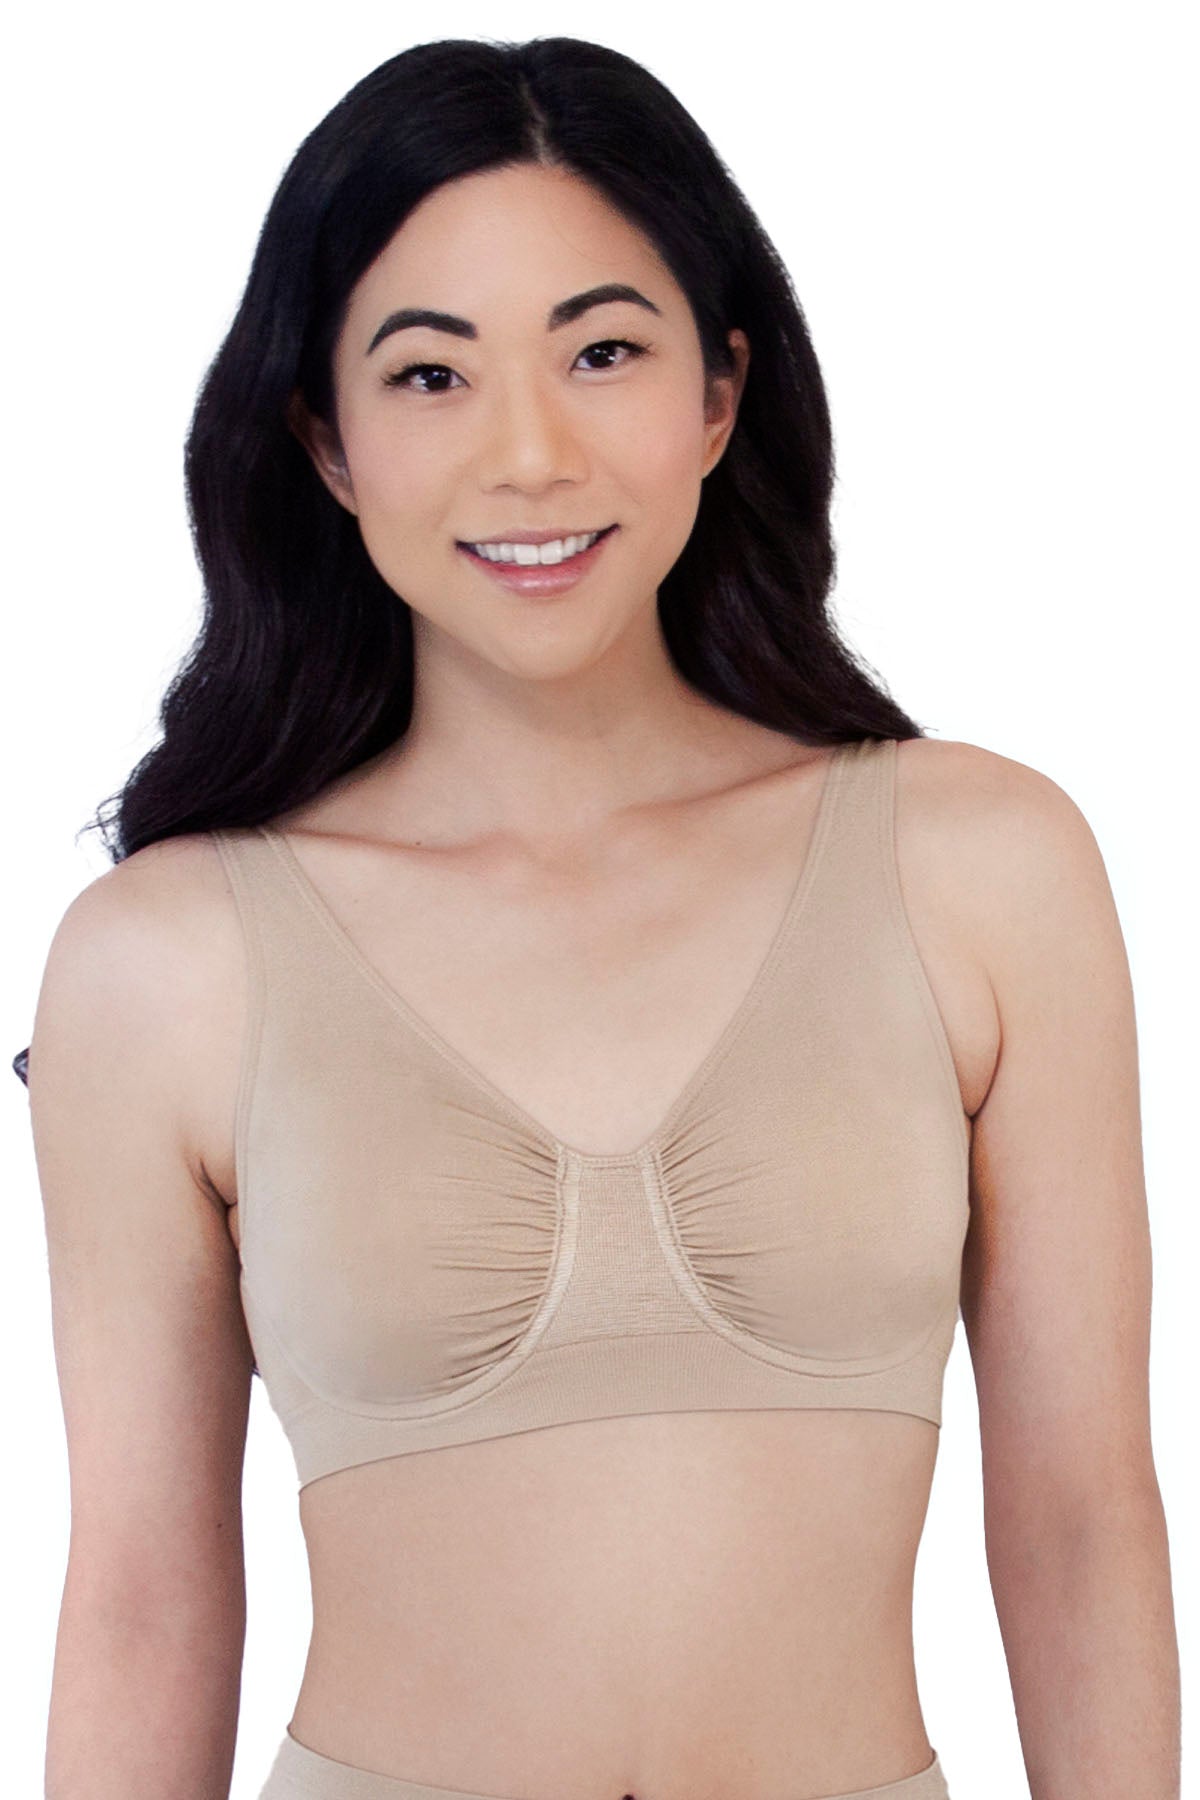 Seamless Underwire Bra With Lace Strap Detail Rhonda Shear, 58% OFF